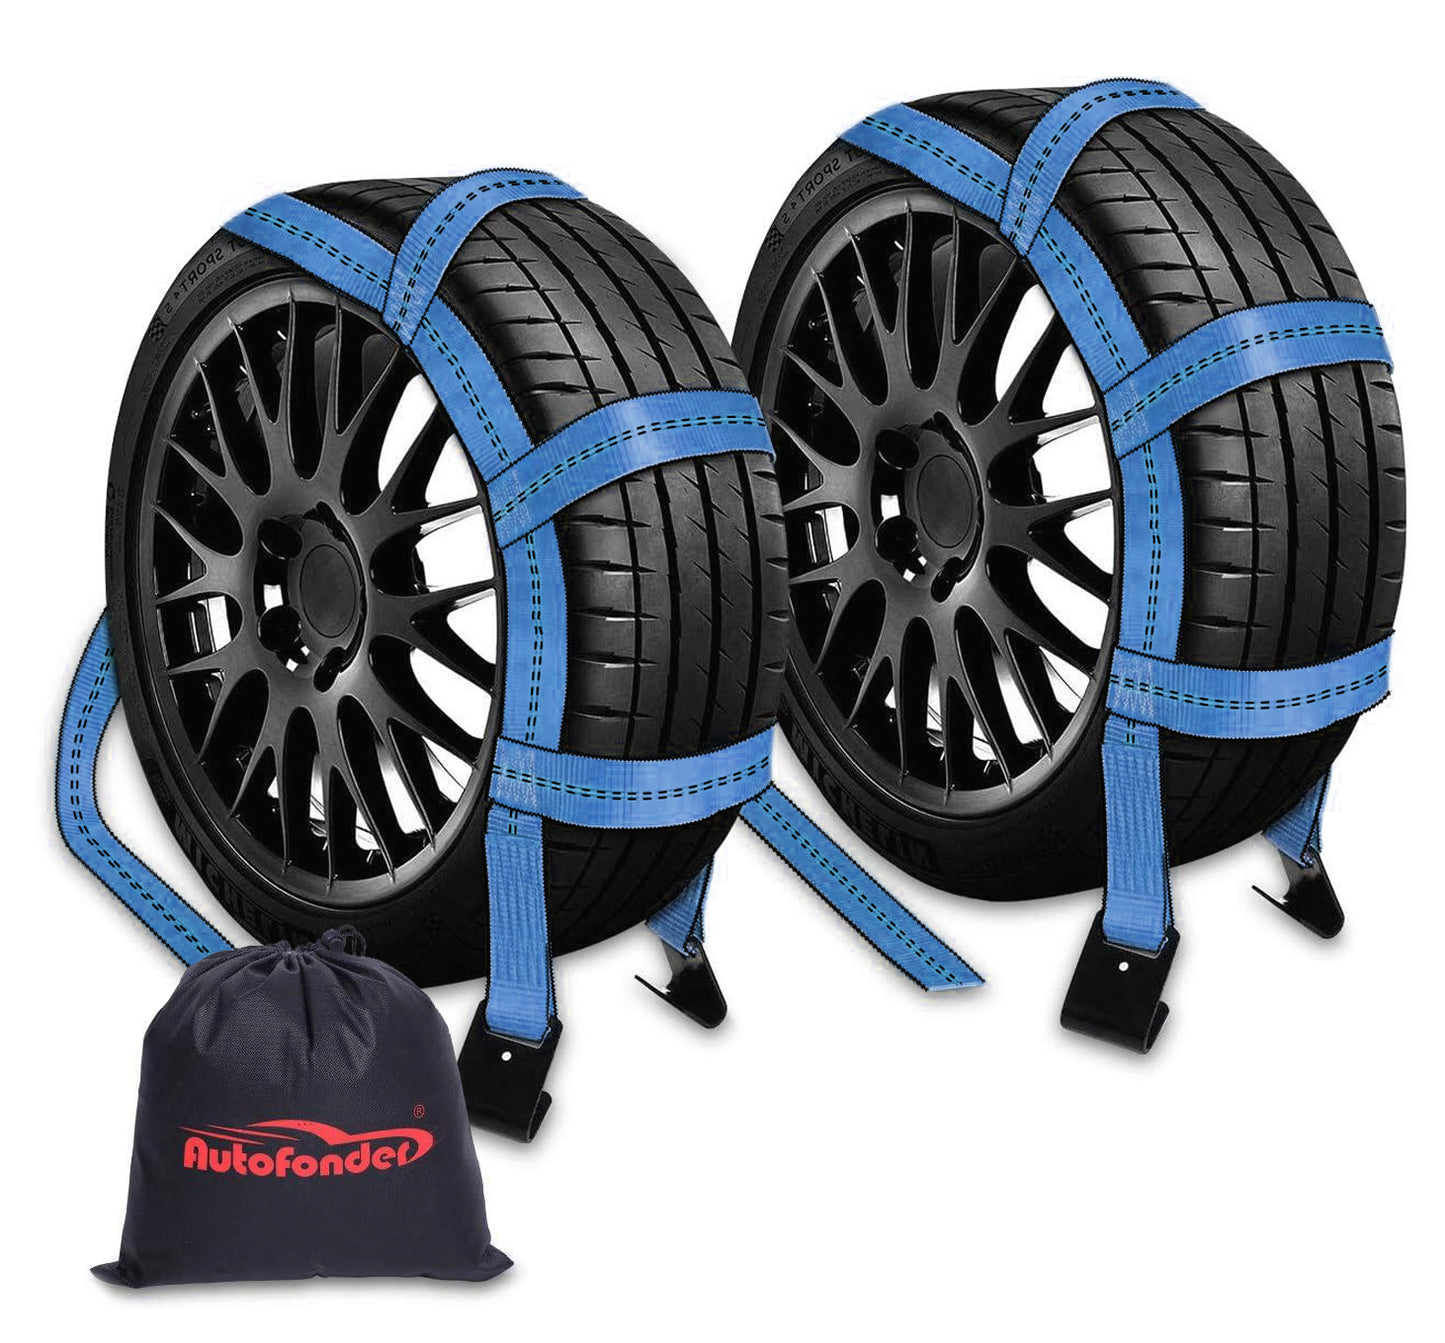 Tow Dolly Basket Straps for 14"-17" Tires